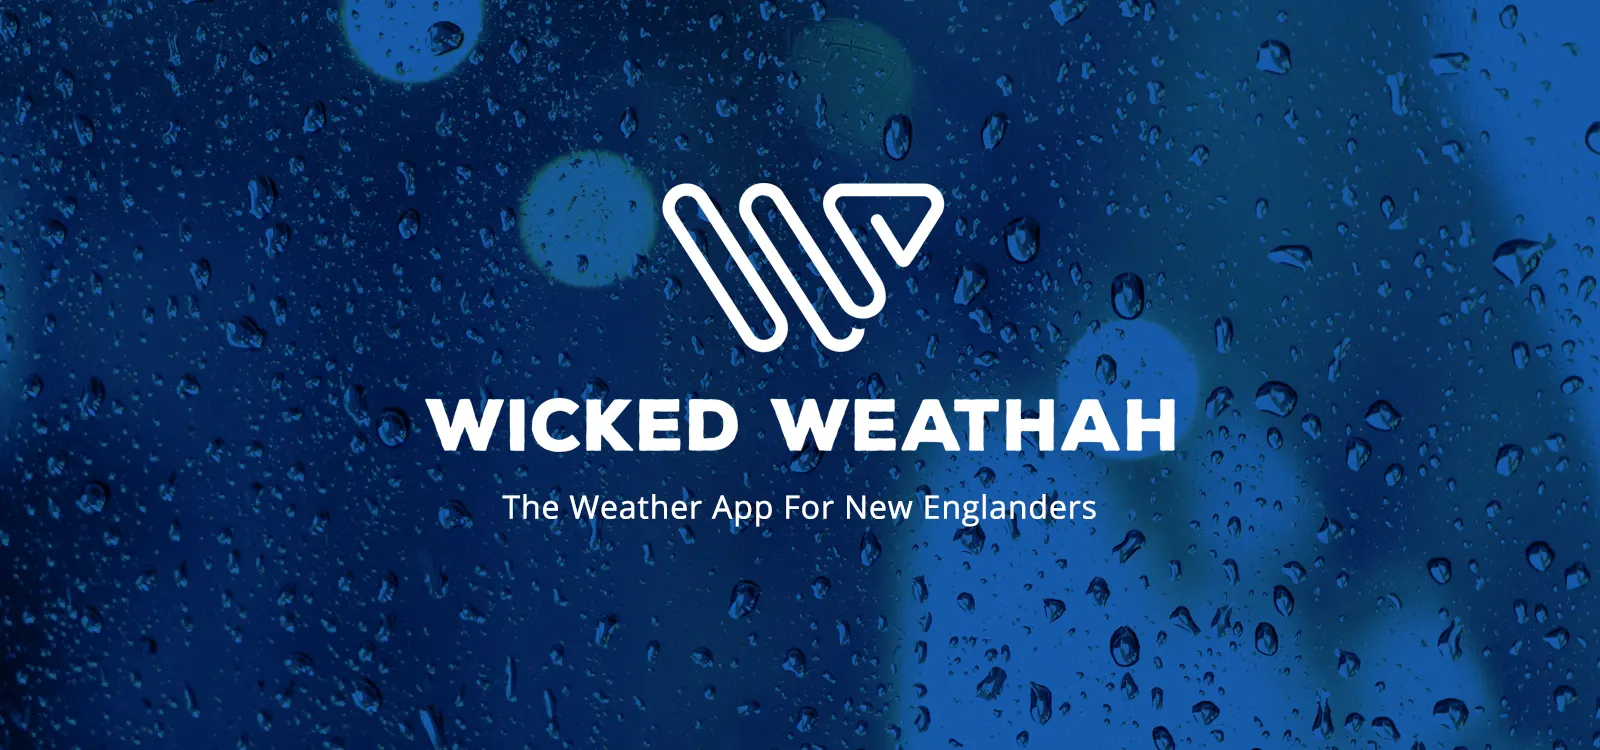 Wicked Weathah - The Weather App For New Englanders